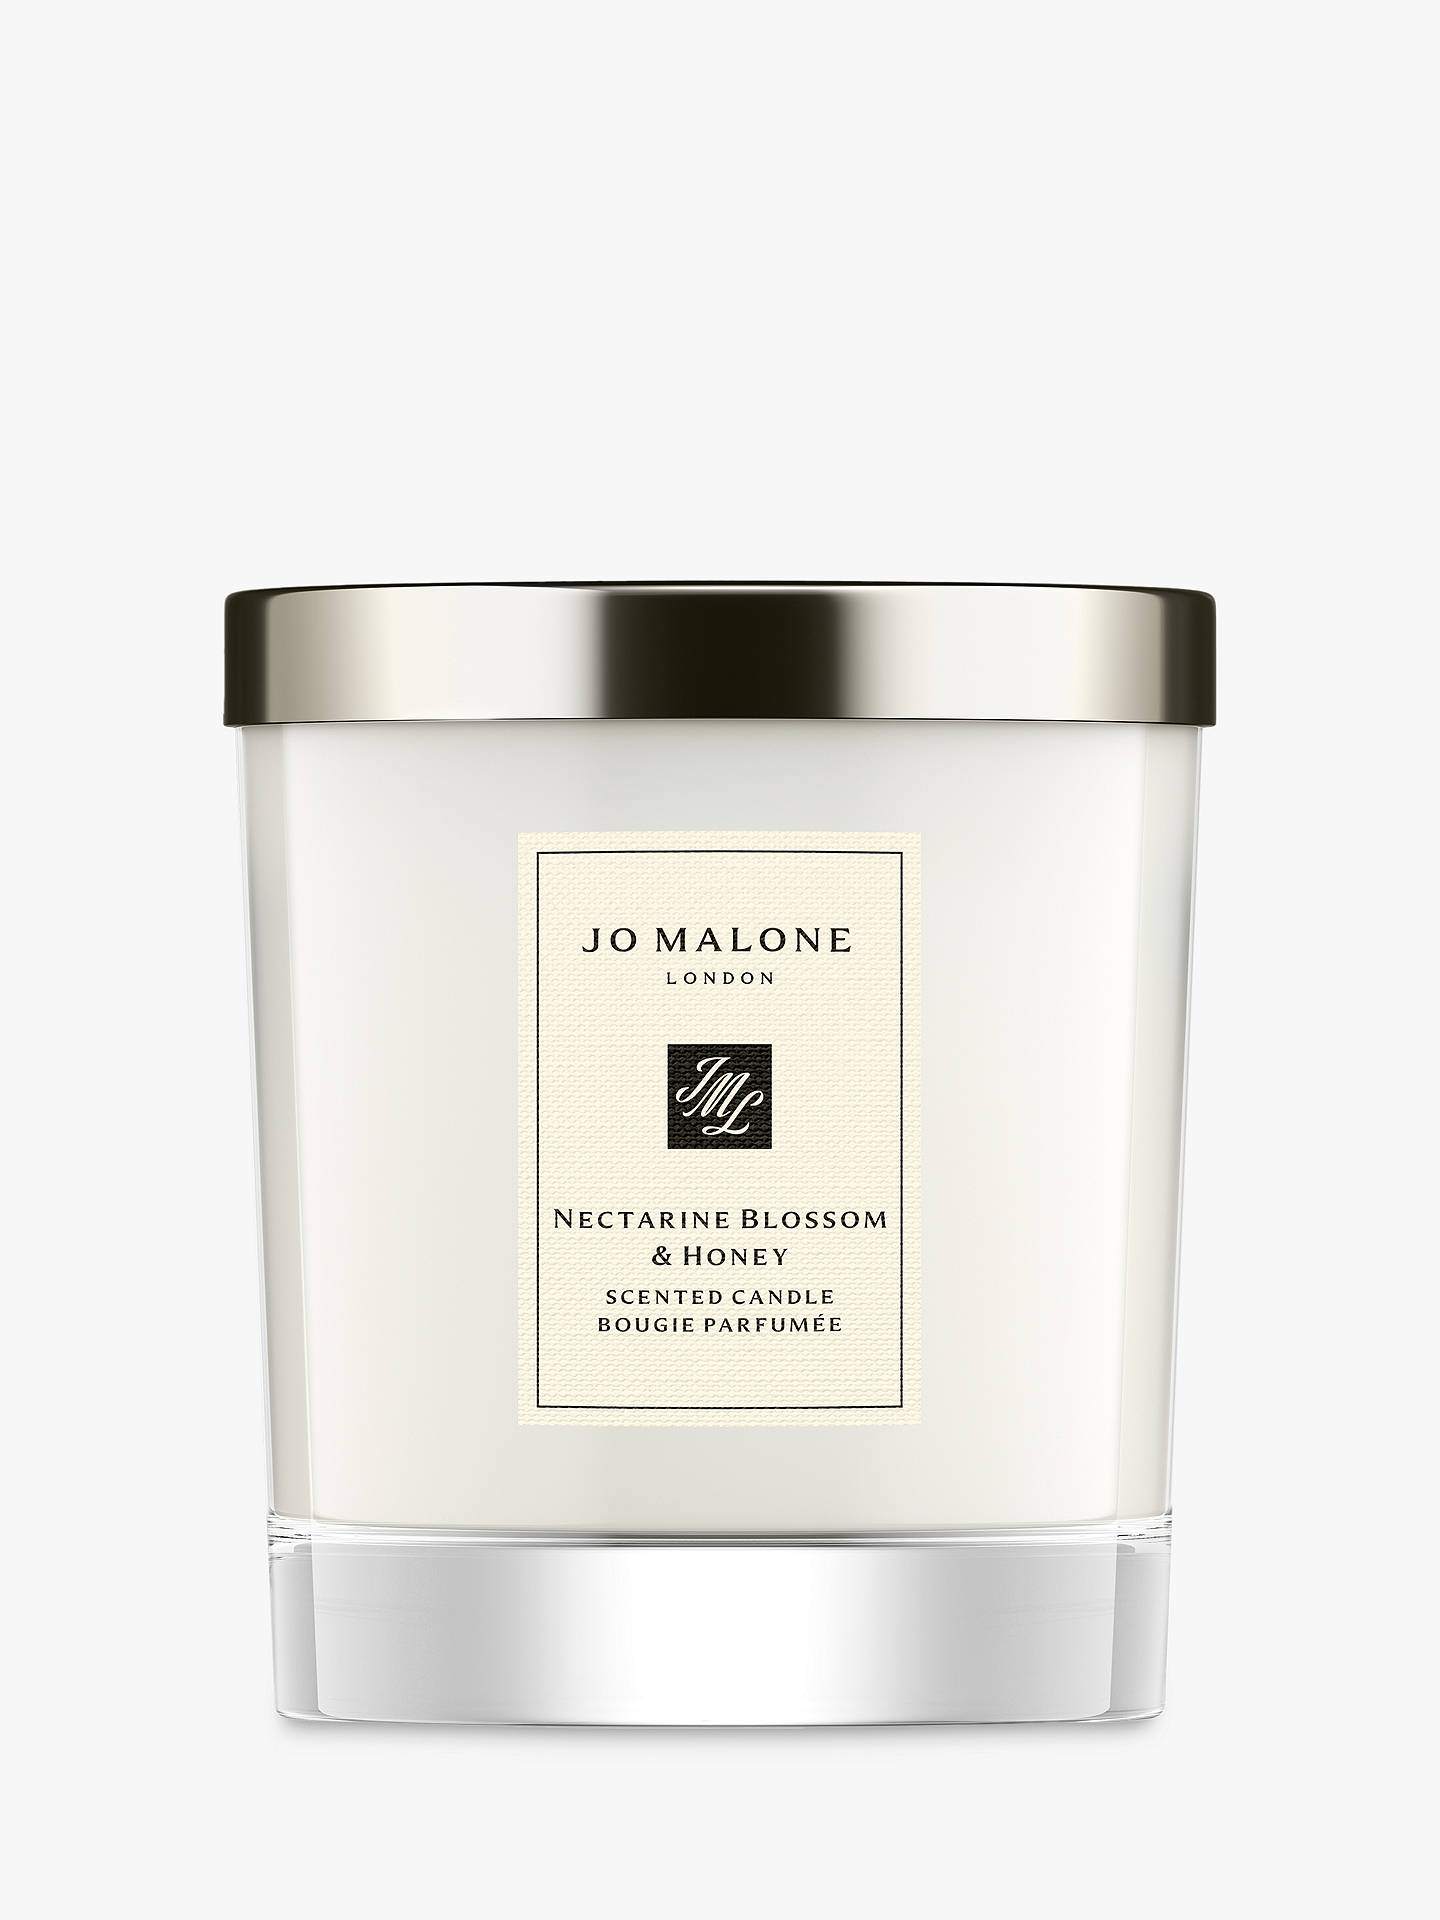 Jo Malone London Nectarine Blossom & Honey Home Scented Candle, 200g at